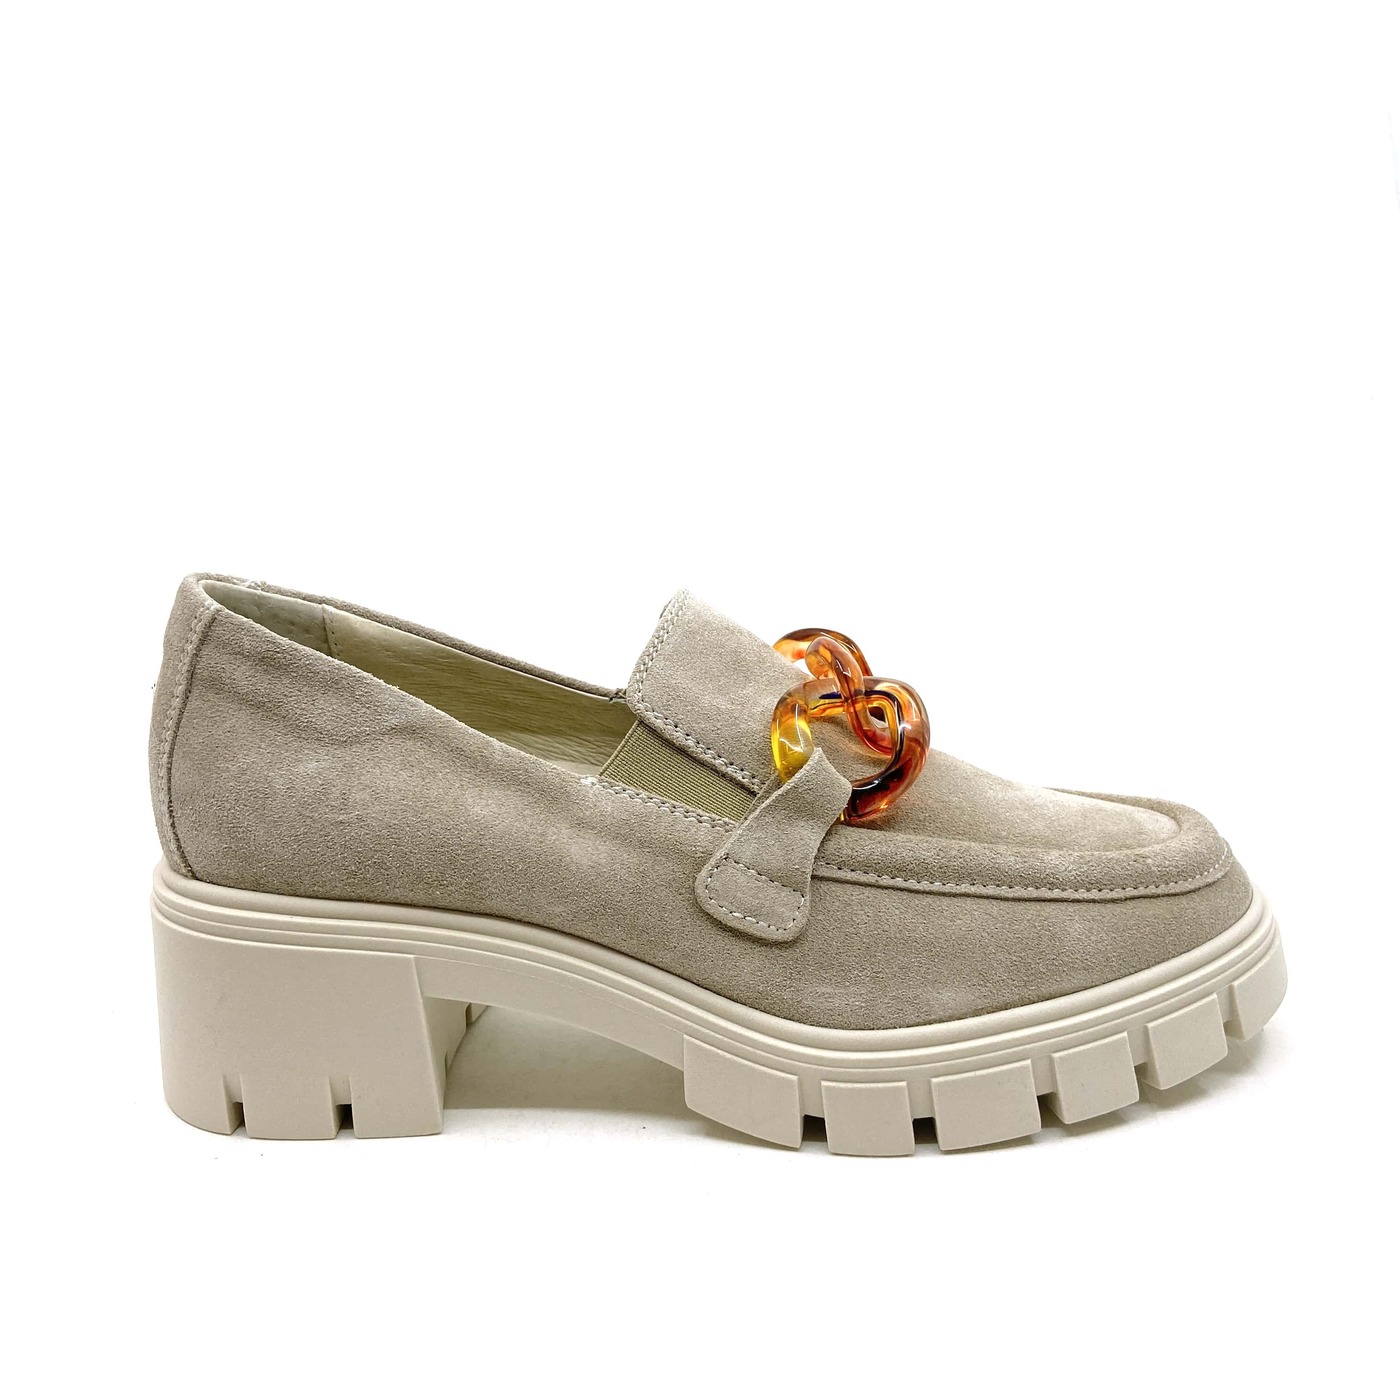 DLSport moccasin ivory